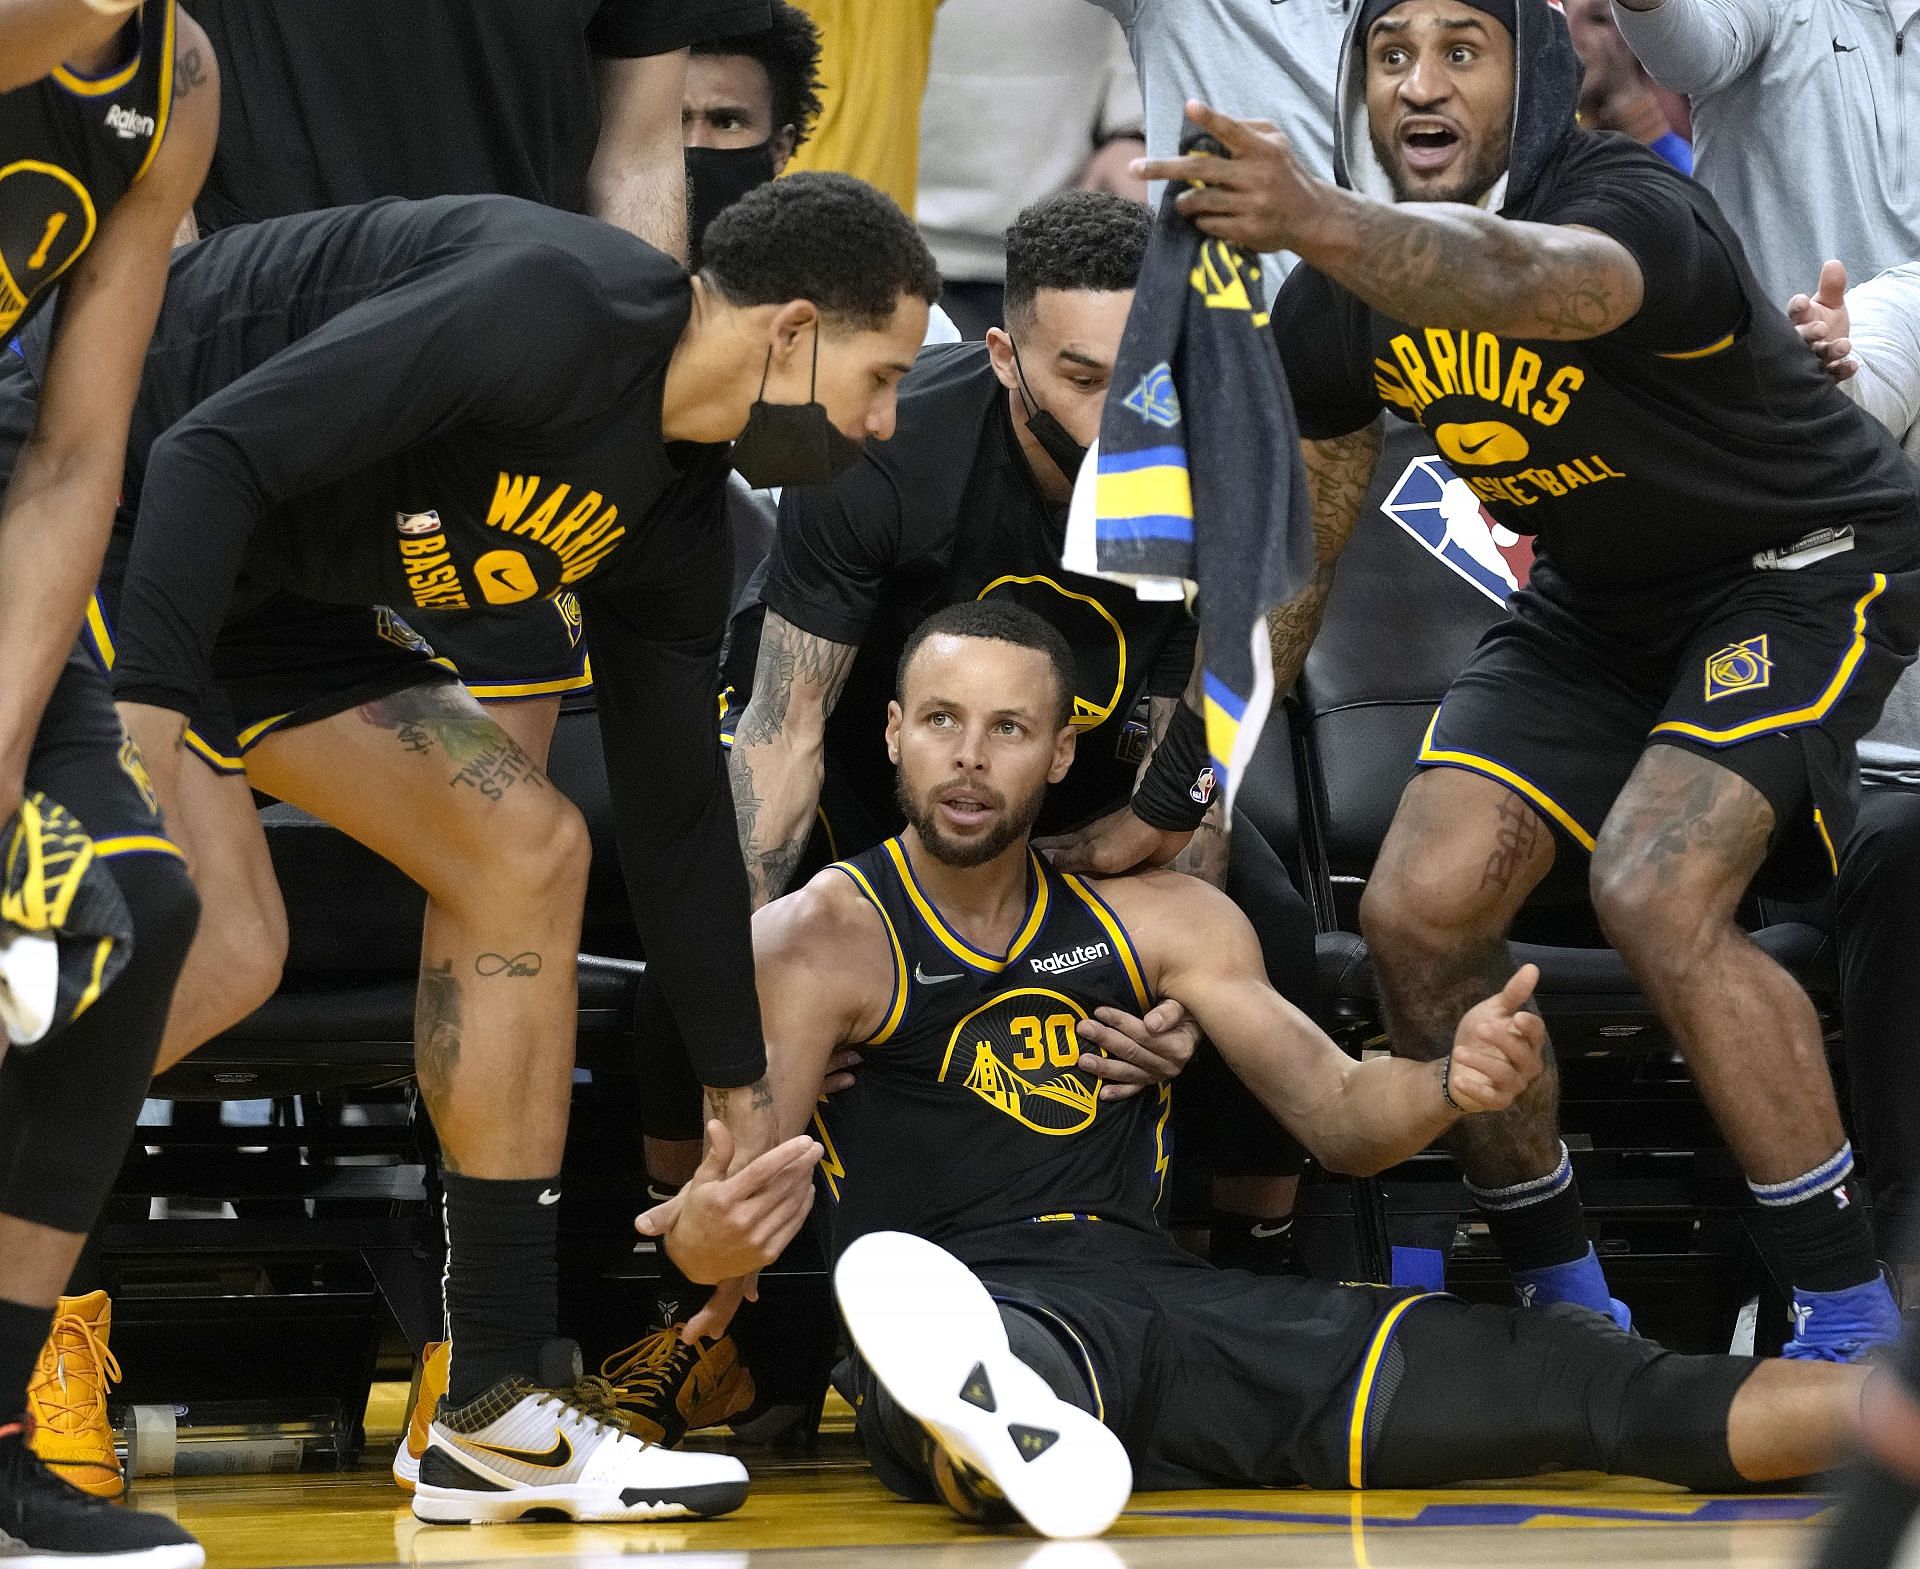 Steph Curry #30 of the Golden State Warriors falls down in front of his bench after making a three-point shot against the Portland Trail Blazers during the second quarter at Chase Center on December 08, 2021 in San Francisco, California.